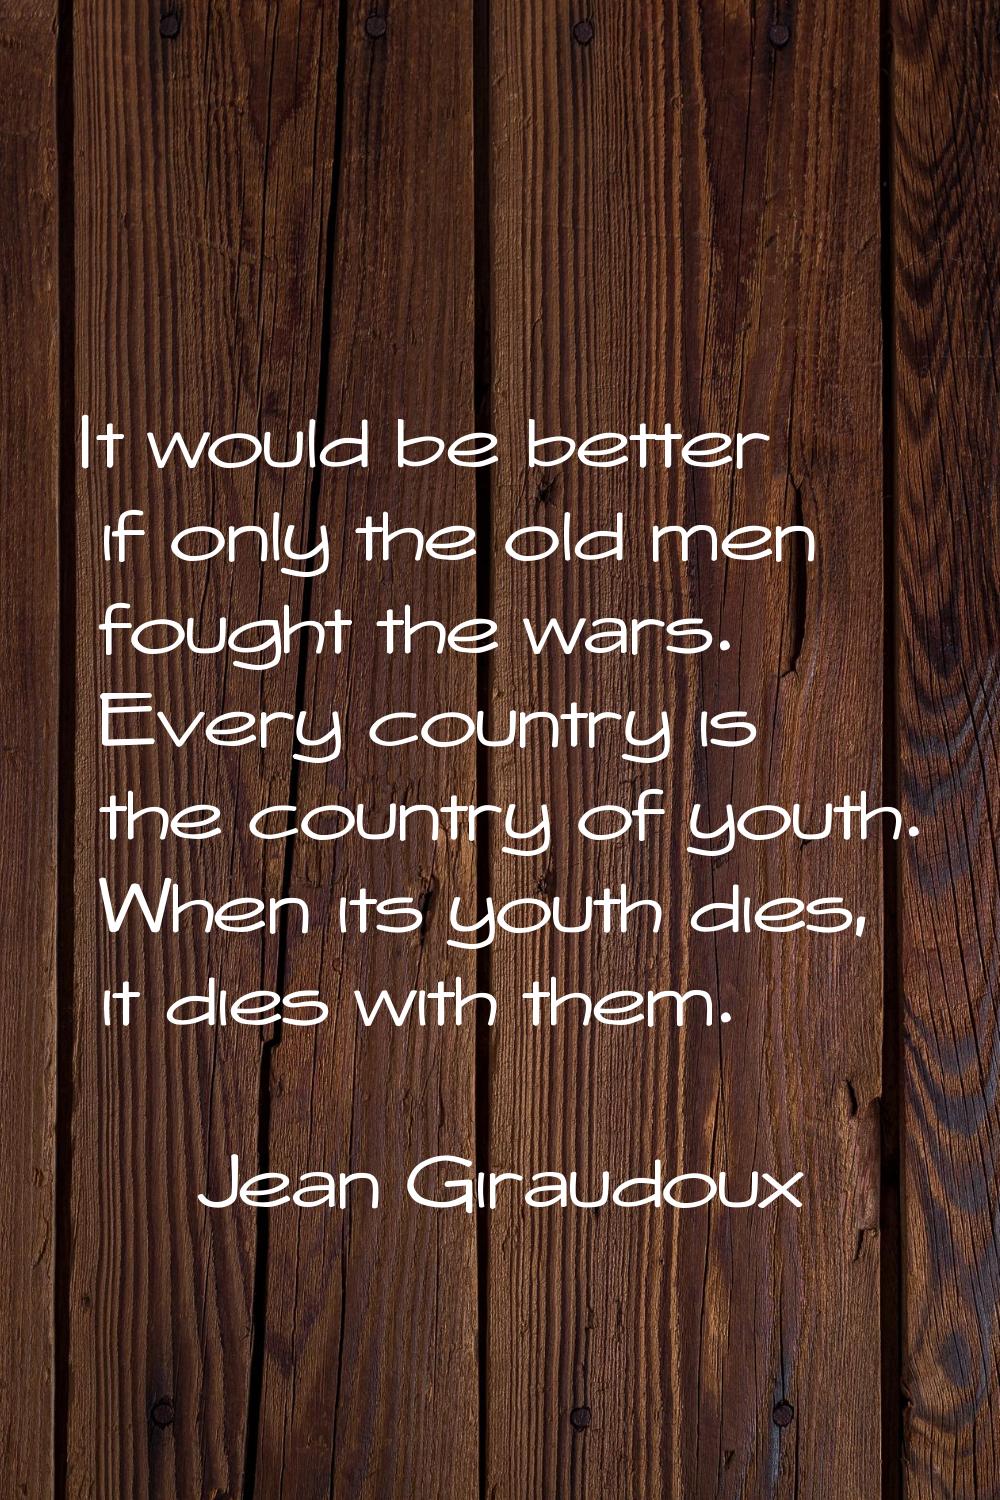 It would be better if only the old men fought the wars. Every country is the country of youth. When